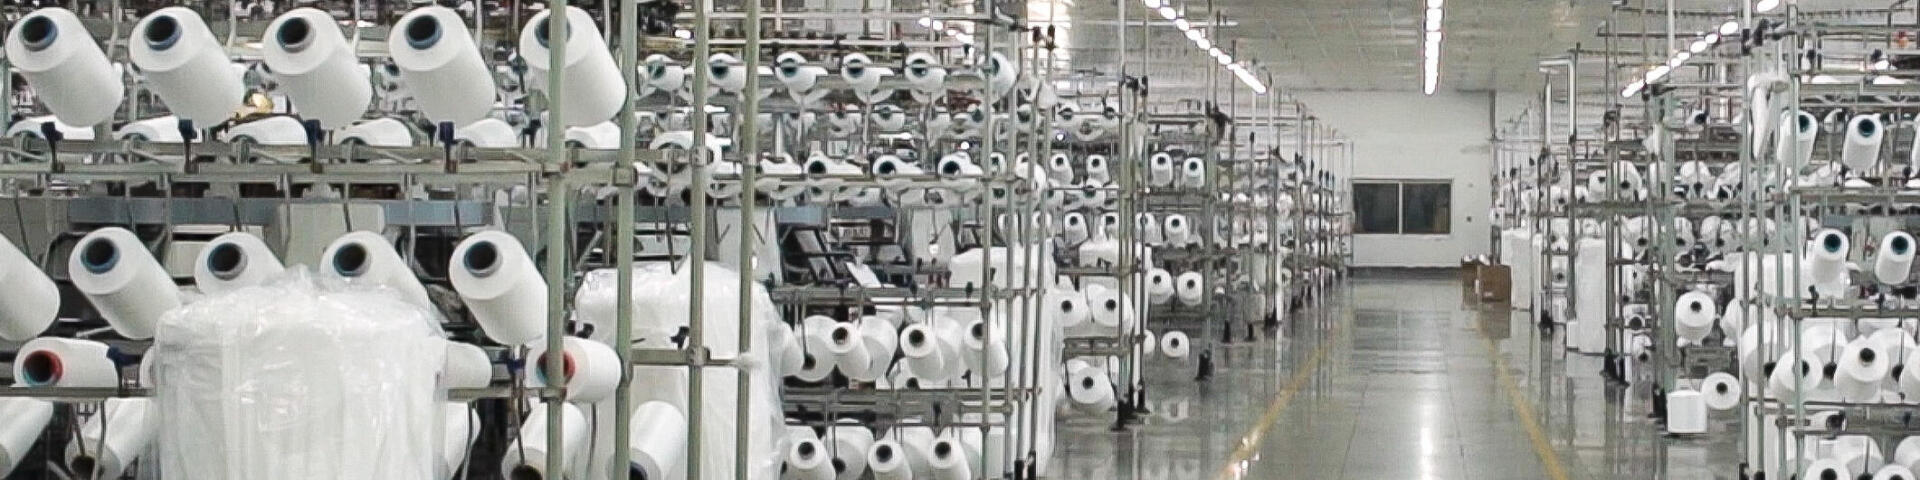 Picture of white bobbins in a warehouse